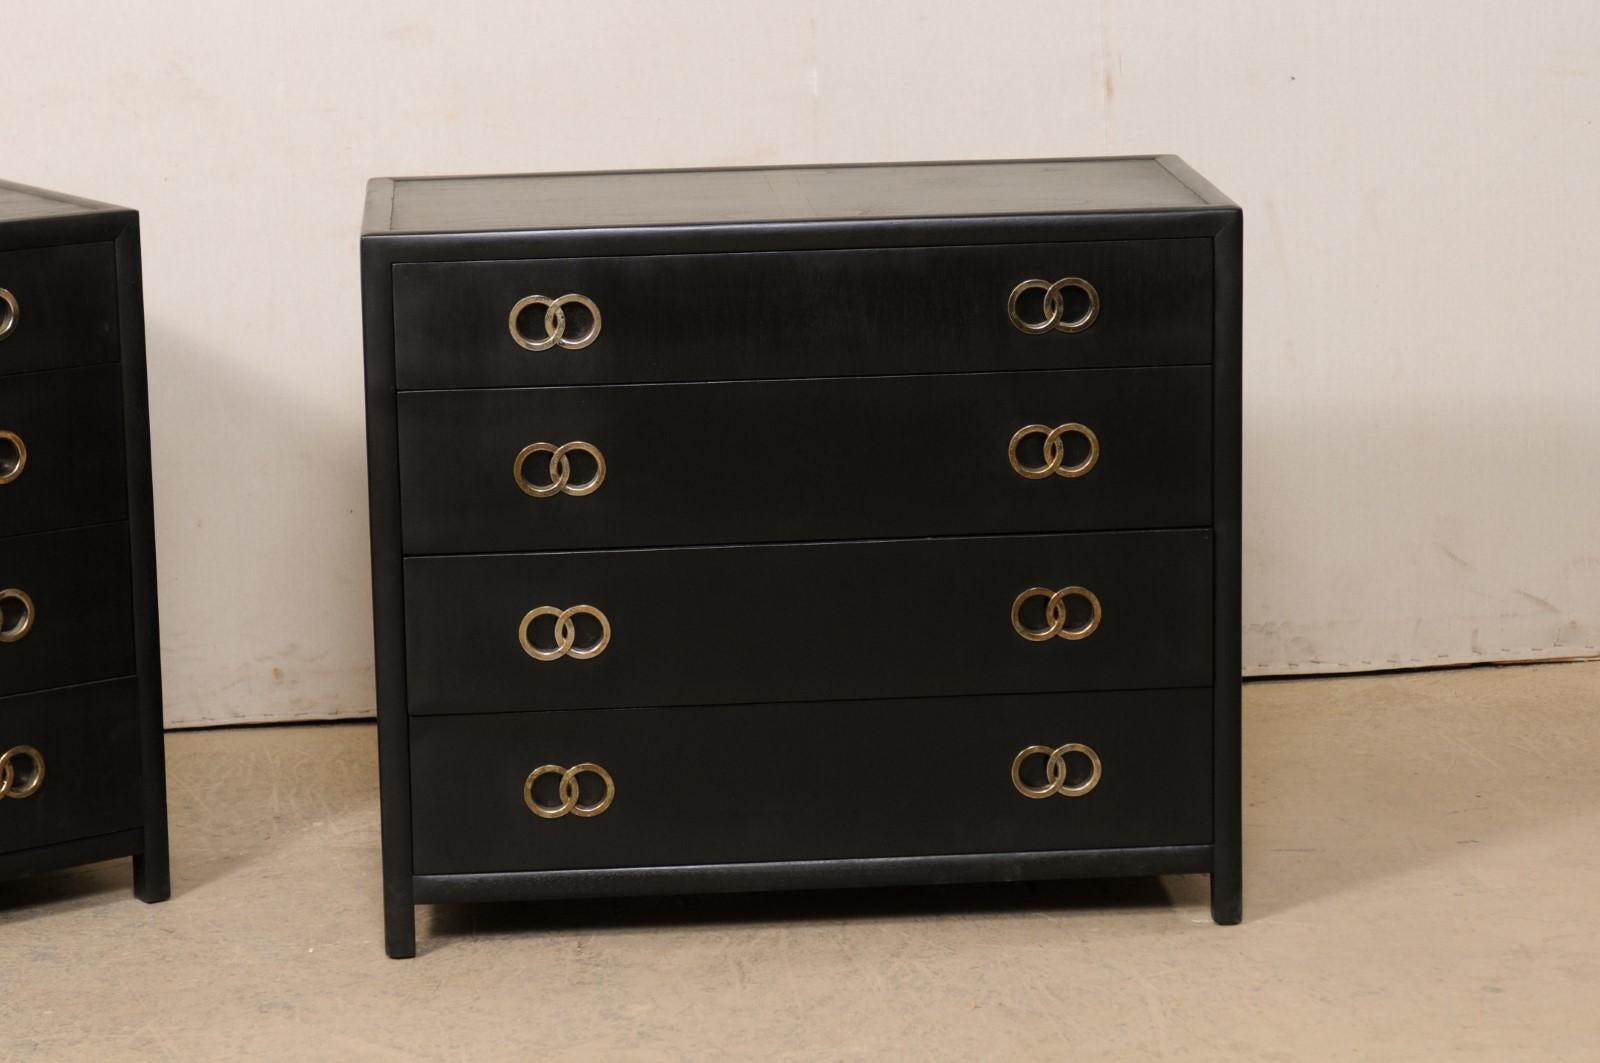 American Pair Vintage Chest of Drawers in Black with Silver Hardware, Clean Modern Design For Sale